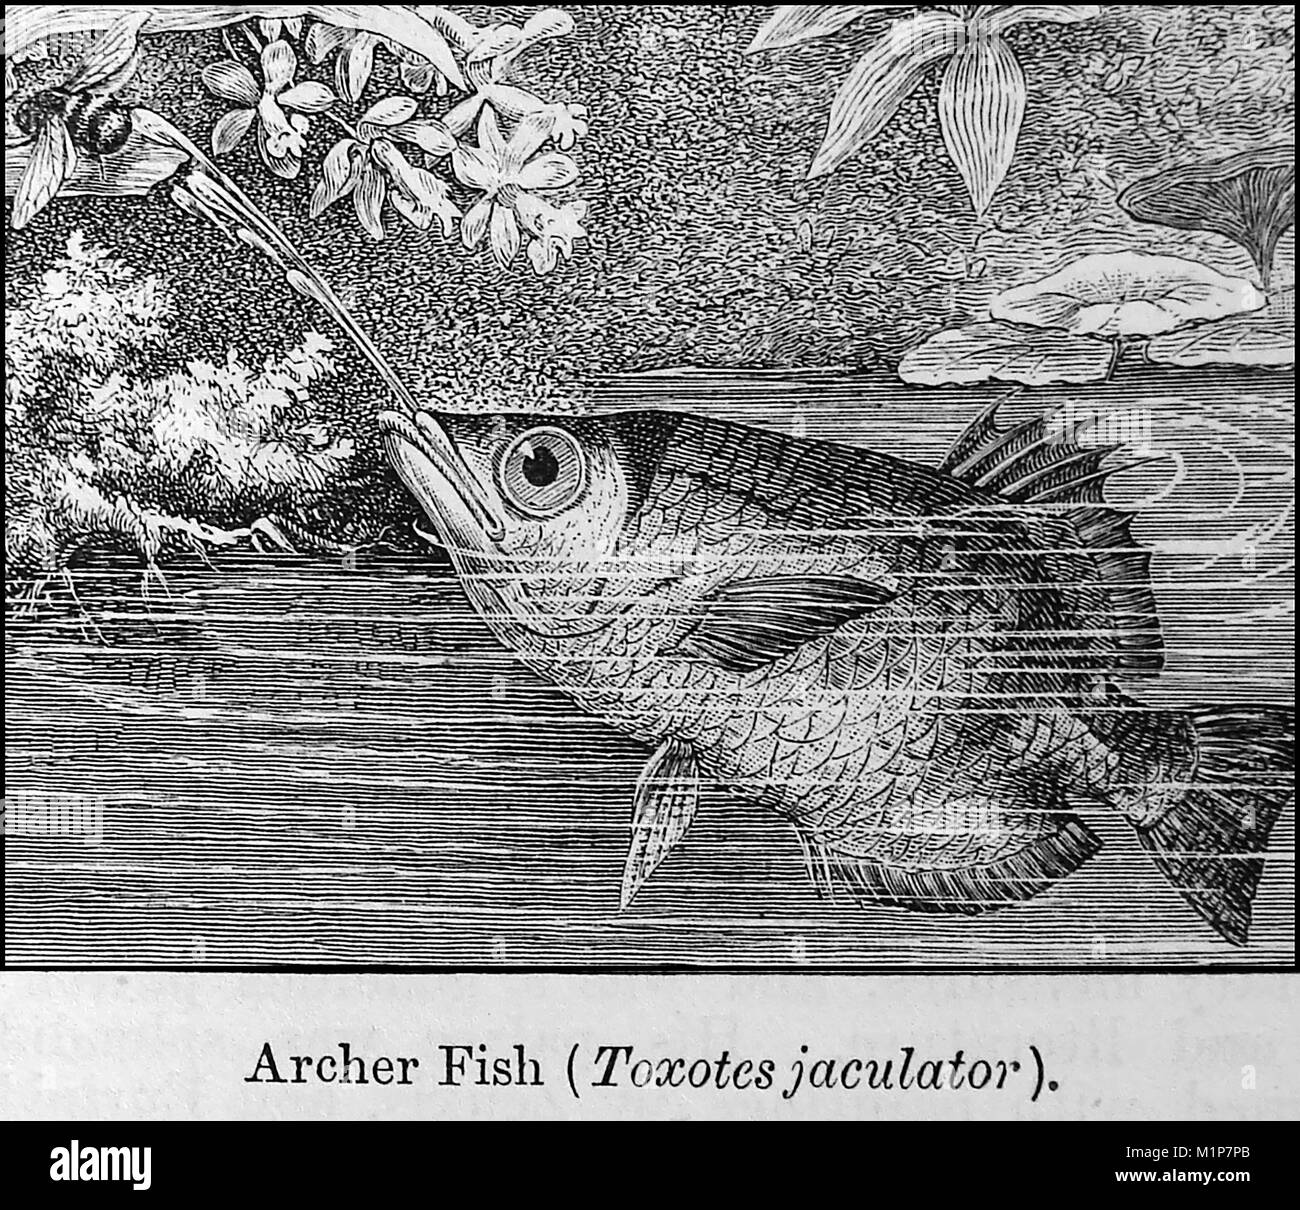 An 1889 illustration from Chamber's Encyclopedia - illustration of an ARCHER FISH aka ARCHER FISH, SPITTING FISH   or SPINNER FISH (Taxotes jaculator) Stock Photo